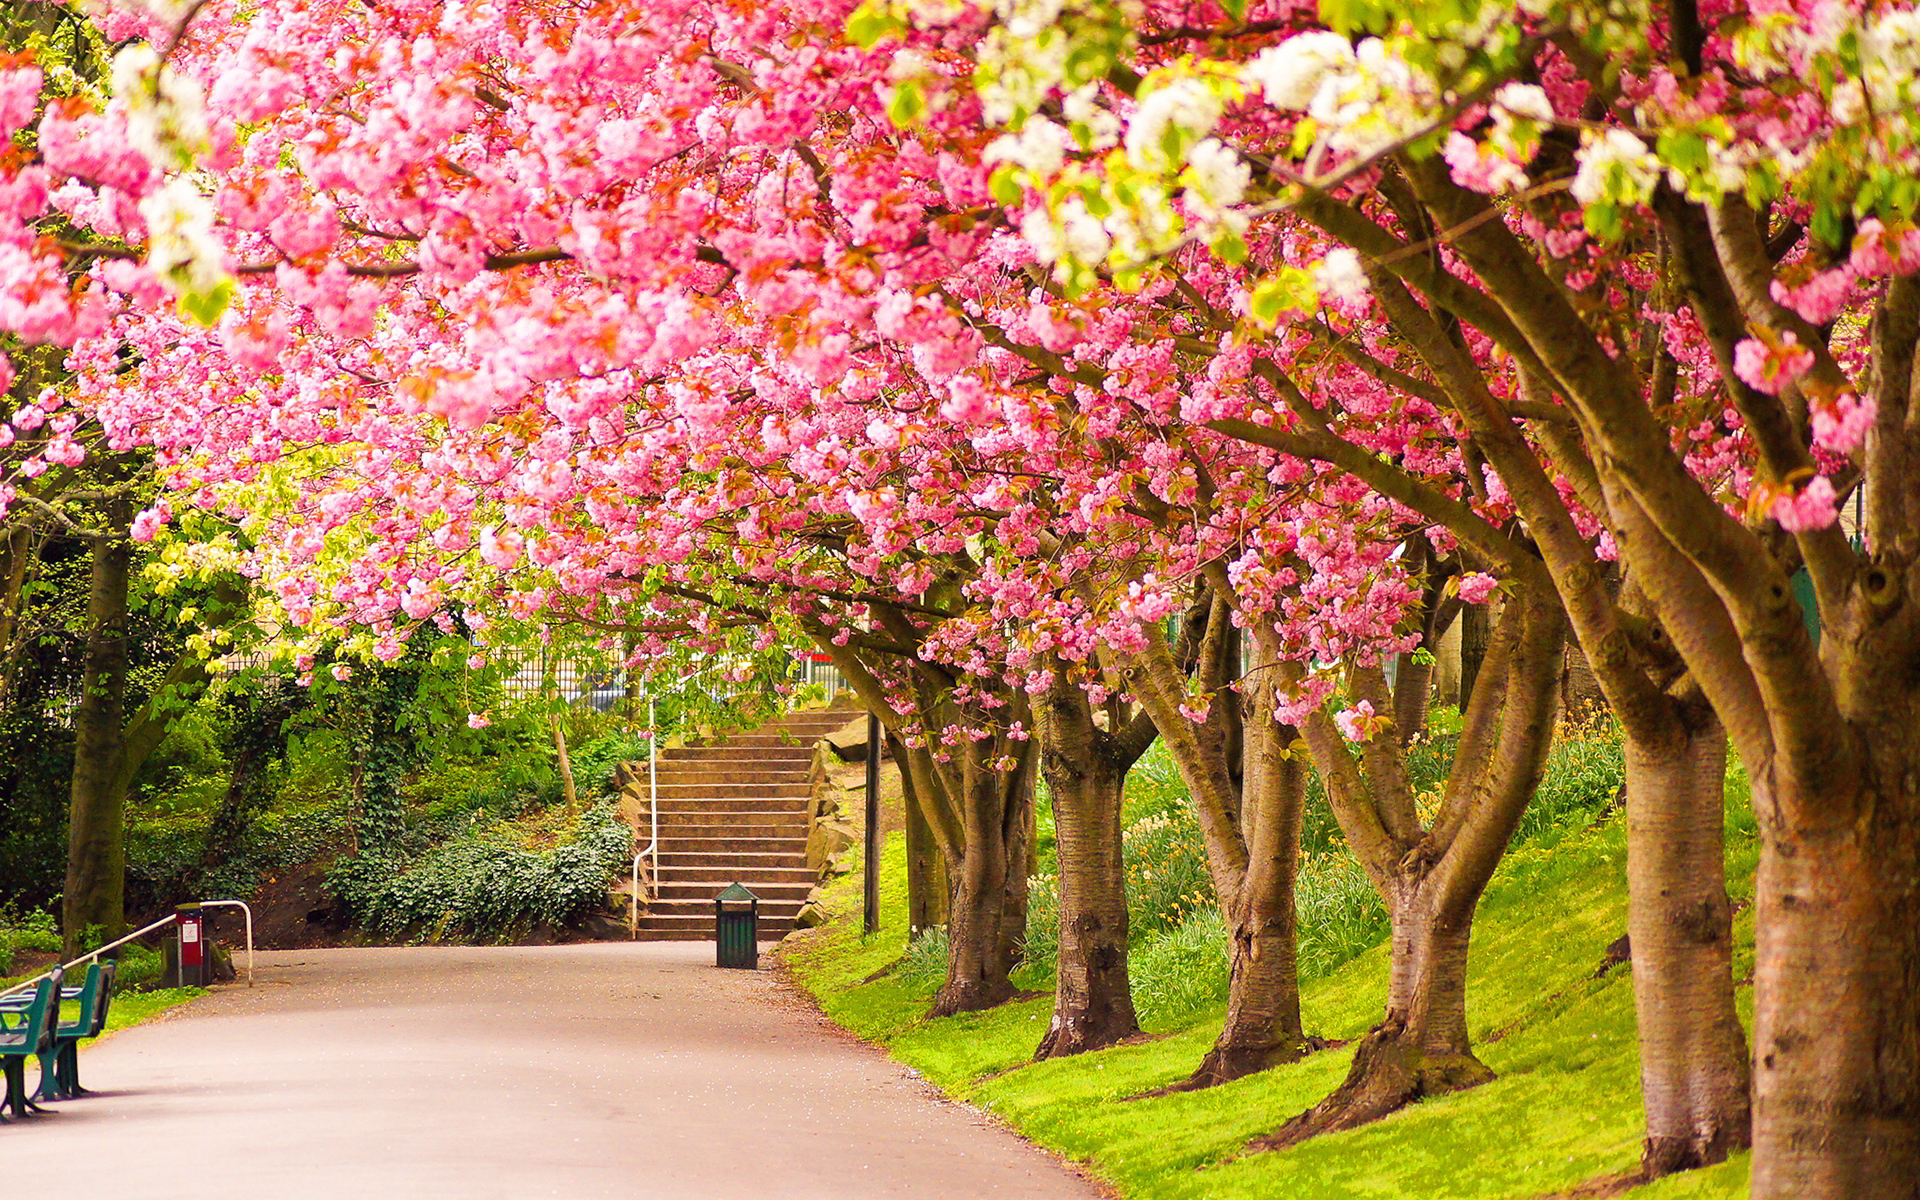  the spring wallpapers category of free hd wallpapers wallpaper nature